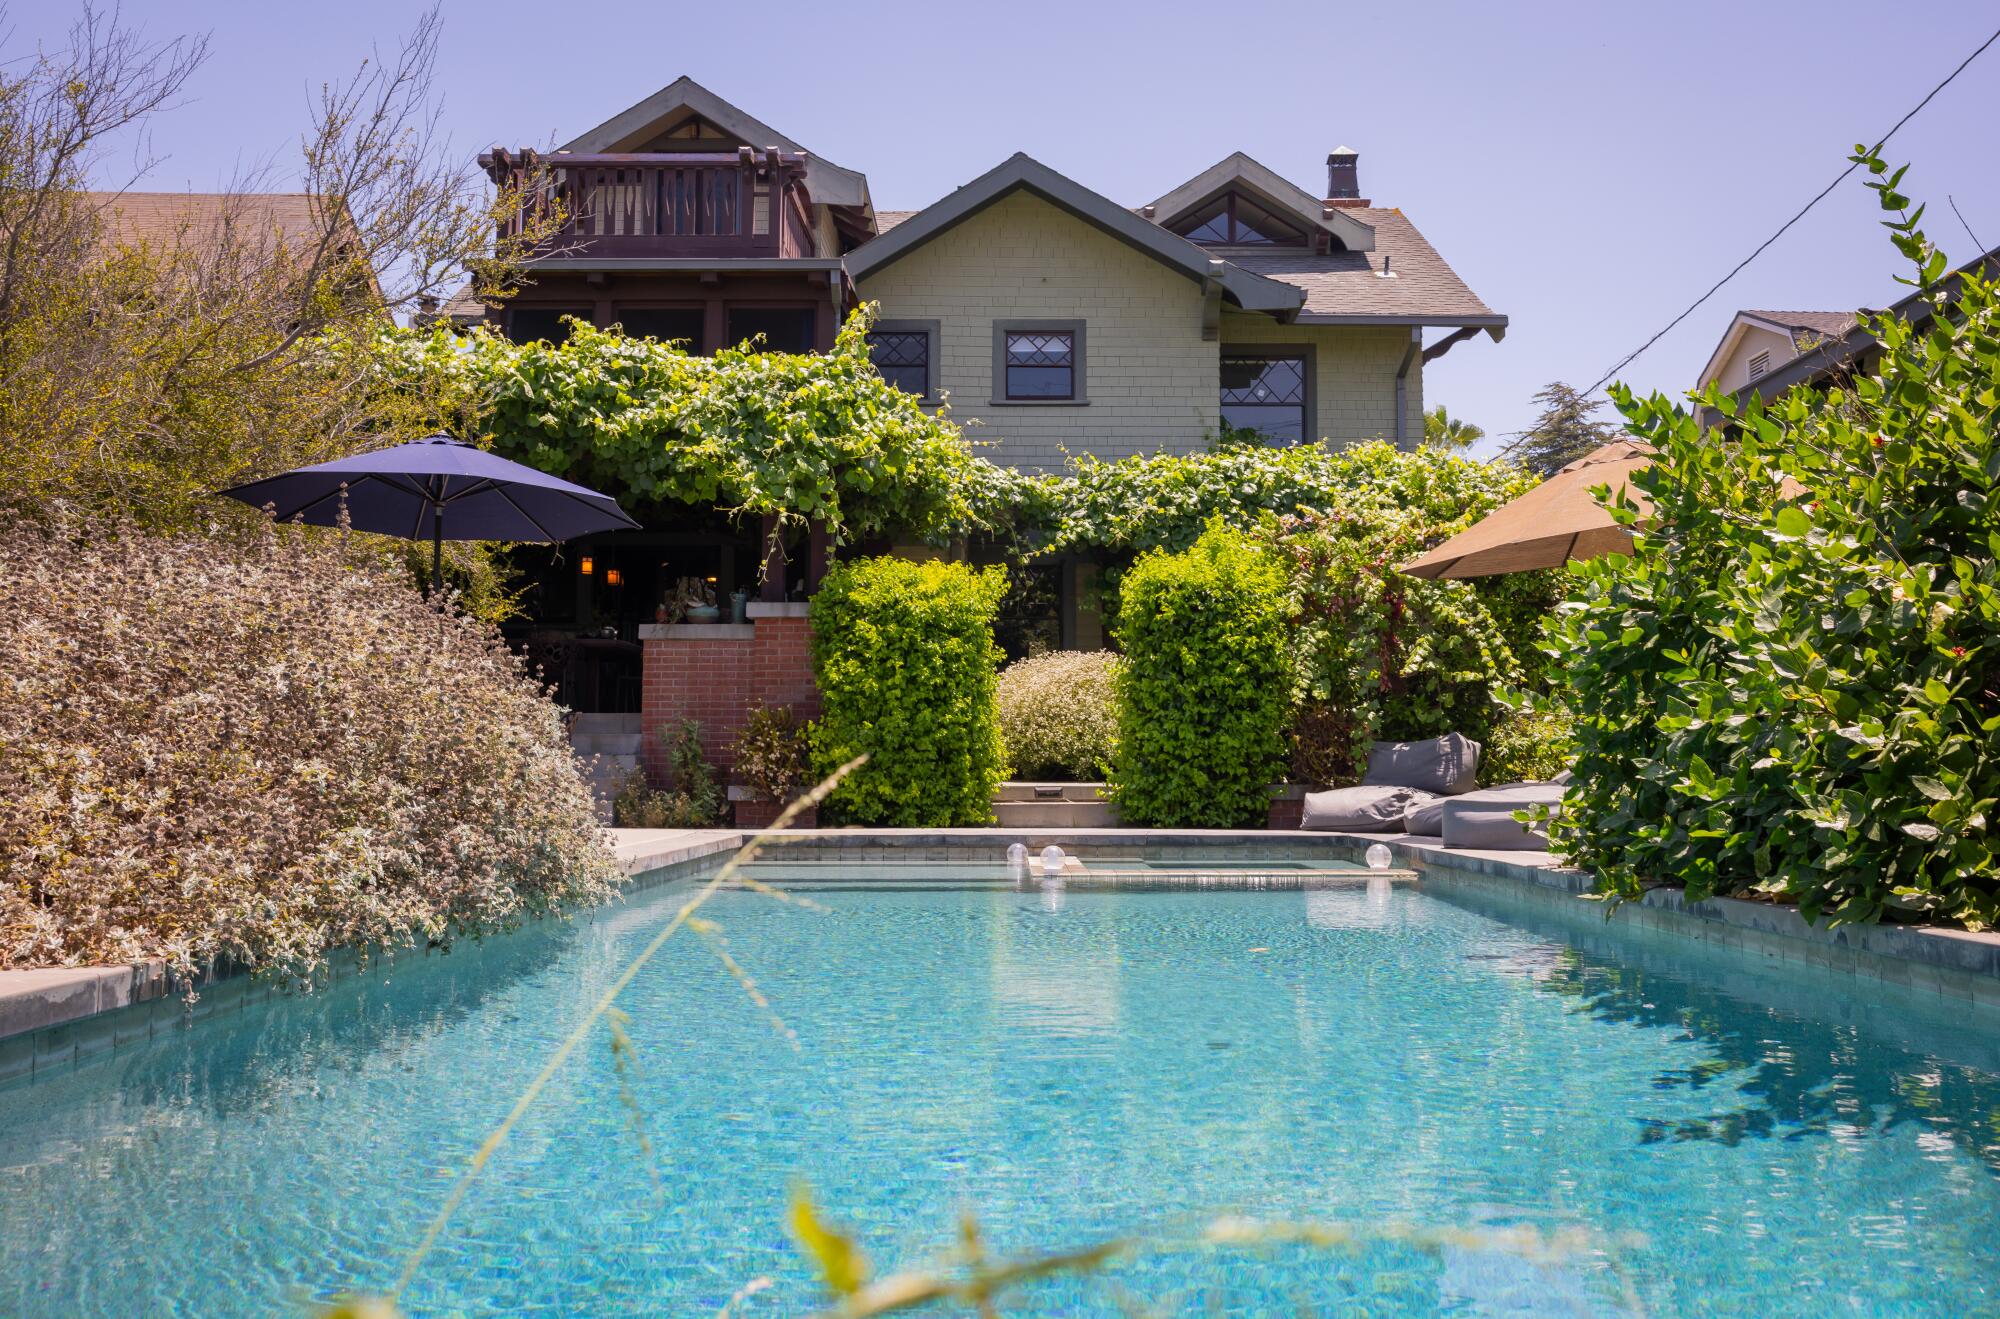 A view of a backyard with a large pool and lots of plants.